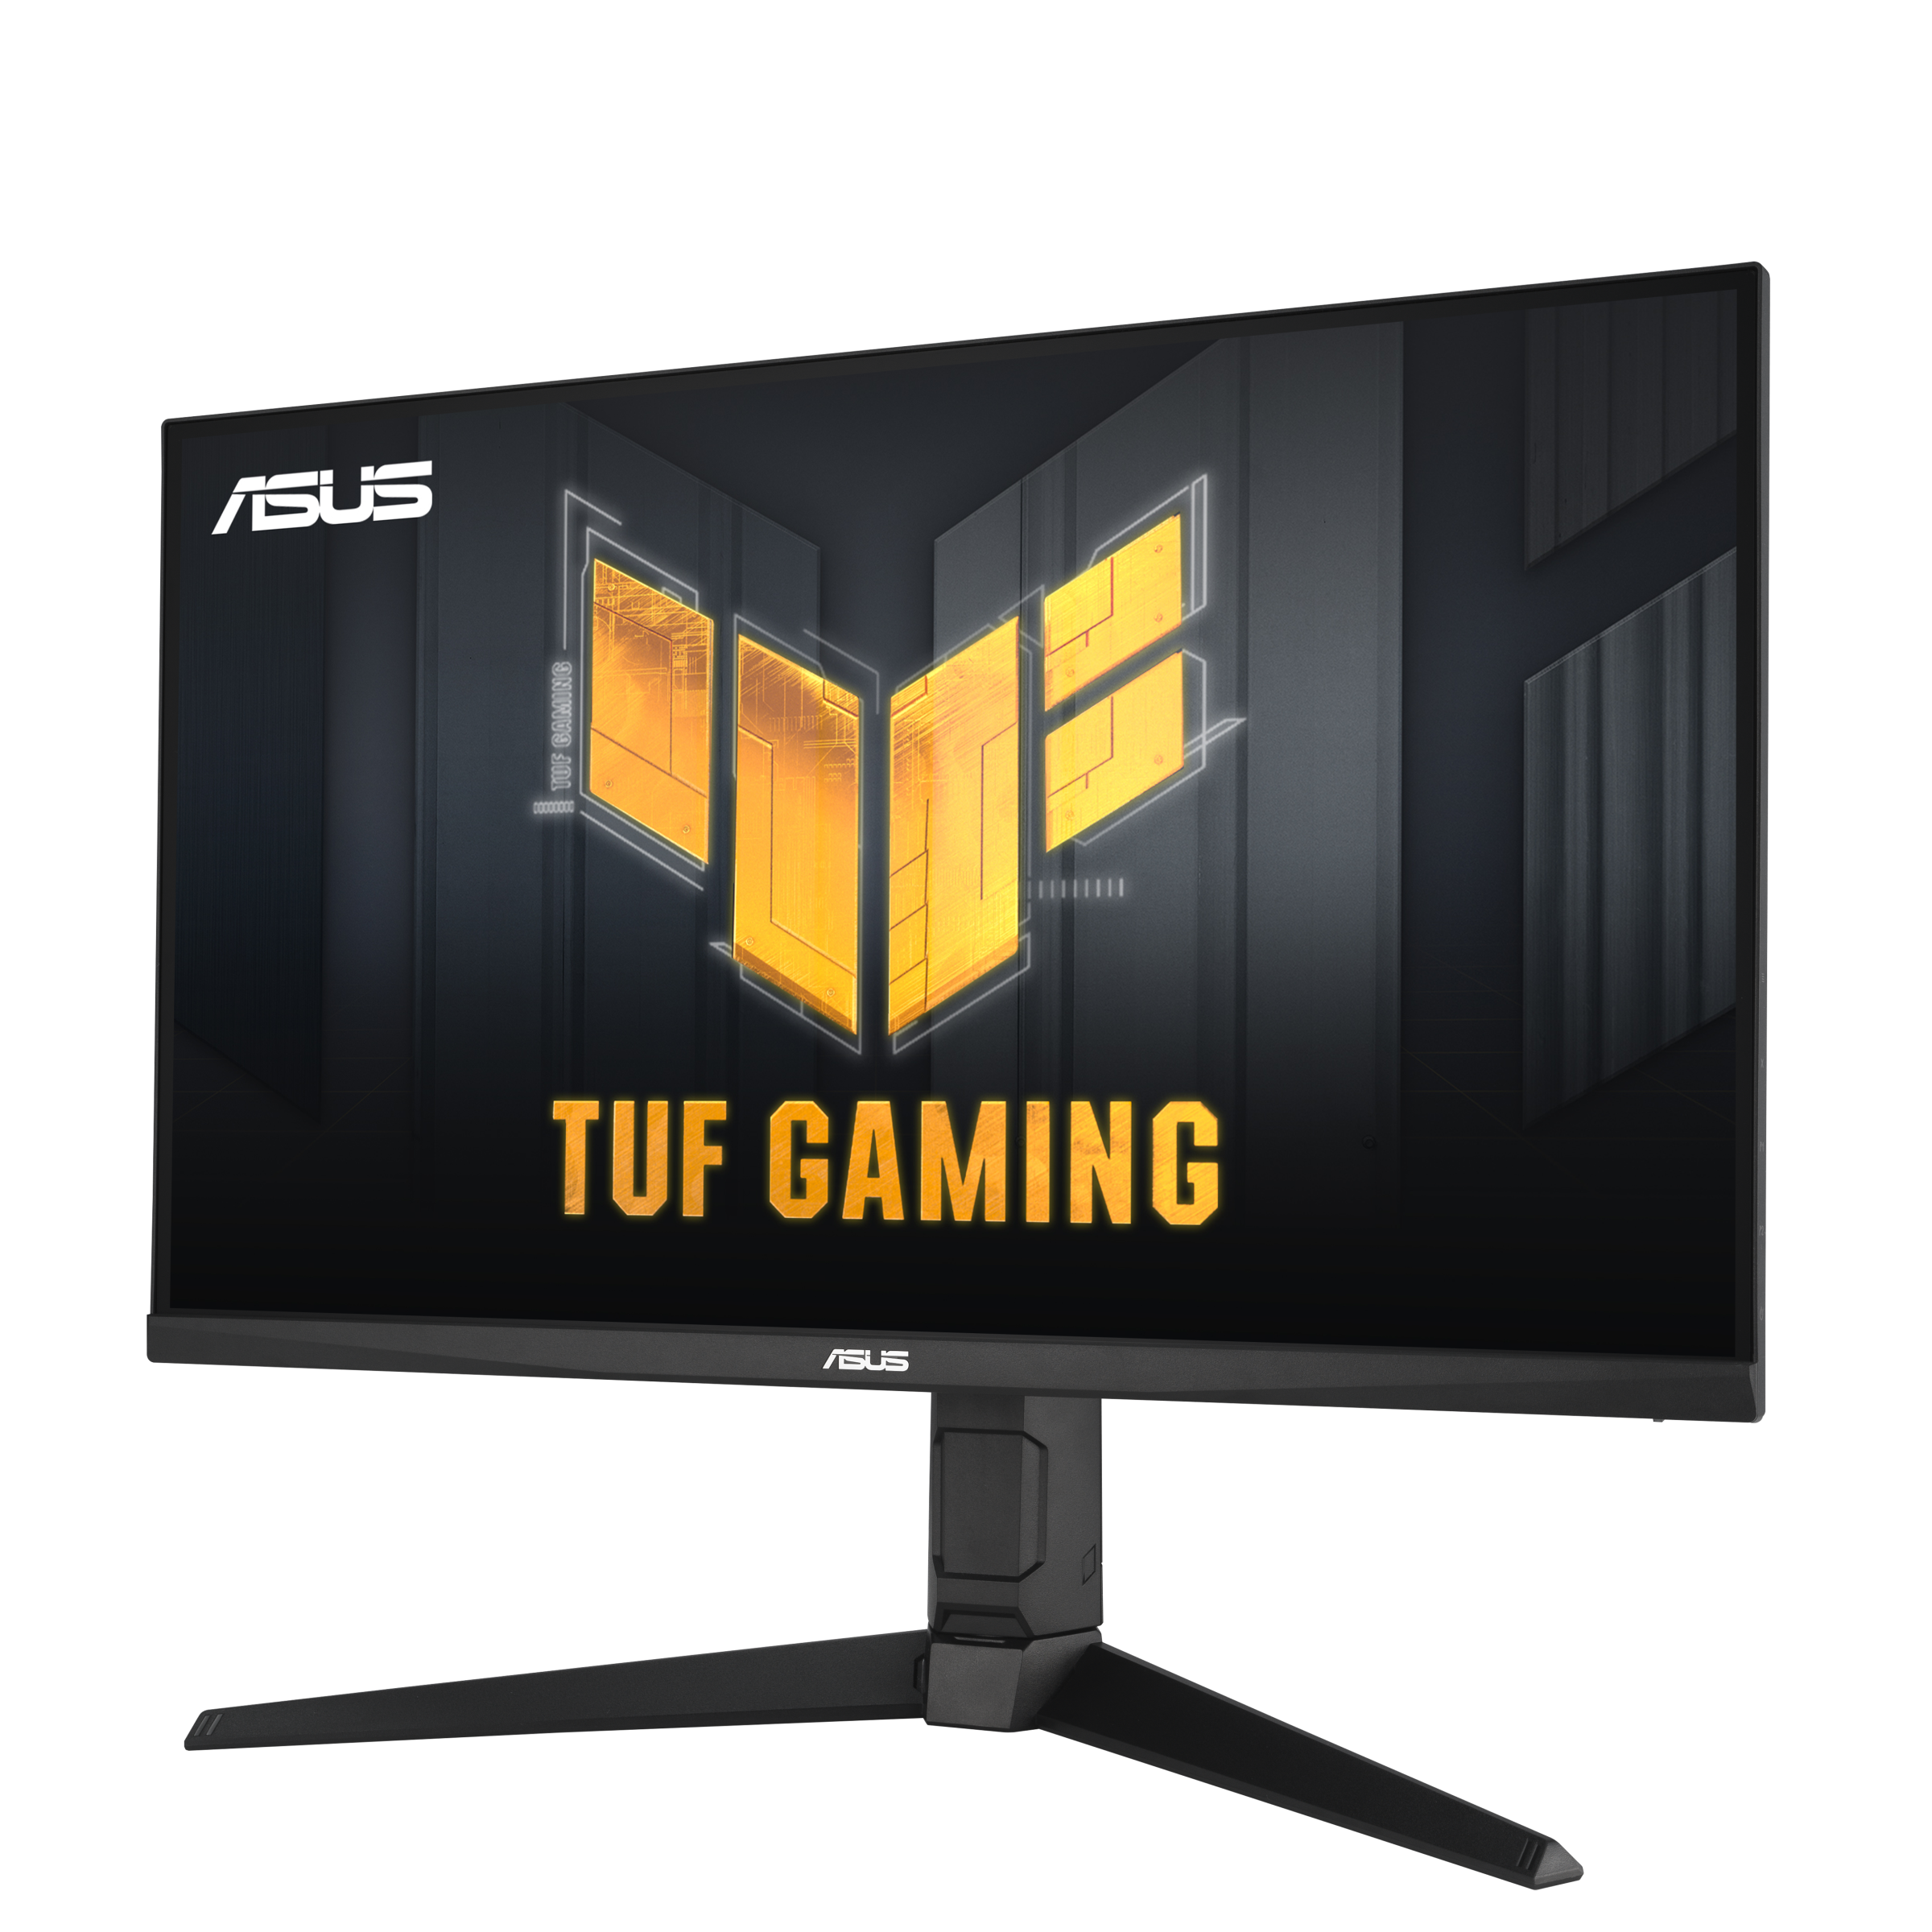 ASUS TUF Gaming 27 2K HDR Gaming Monitor (VG27AQ) - QHD (2560 x 1440),  165Hz (Supports 144Hz), 1ms, Extreme Low Motion Blur, Speaker, G-SYNC